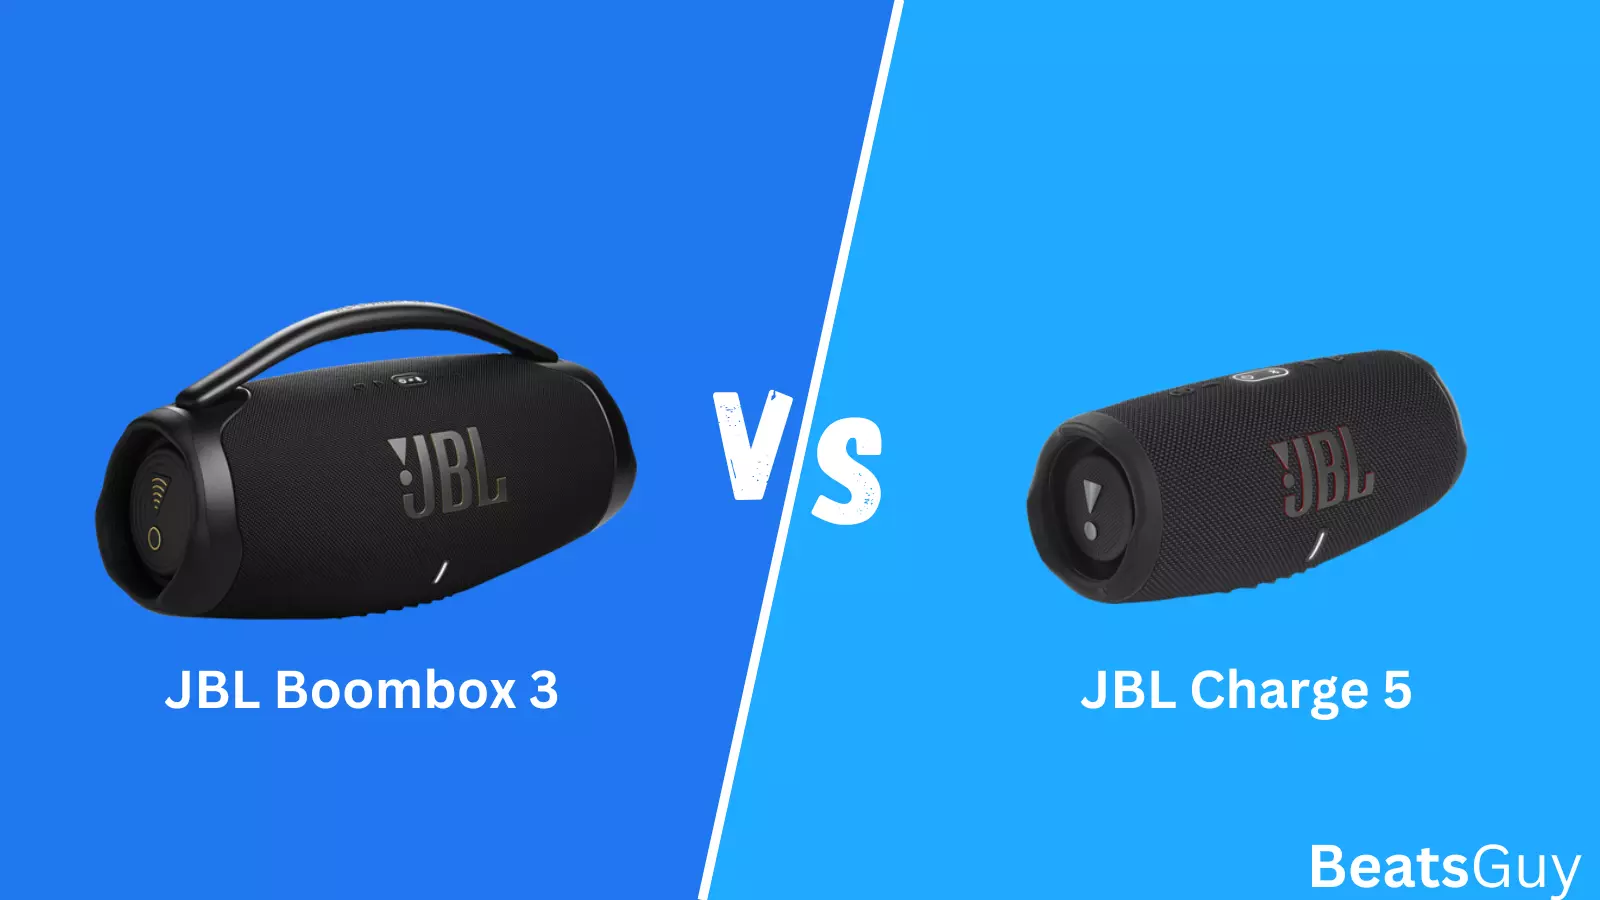 JBL Boombox 3 vs JBL Charge 5: What is the difference?